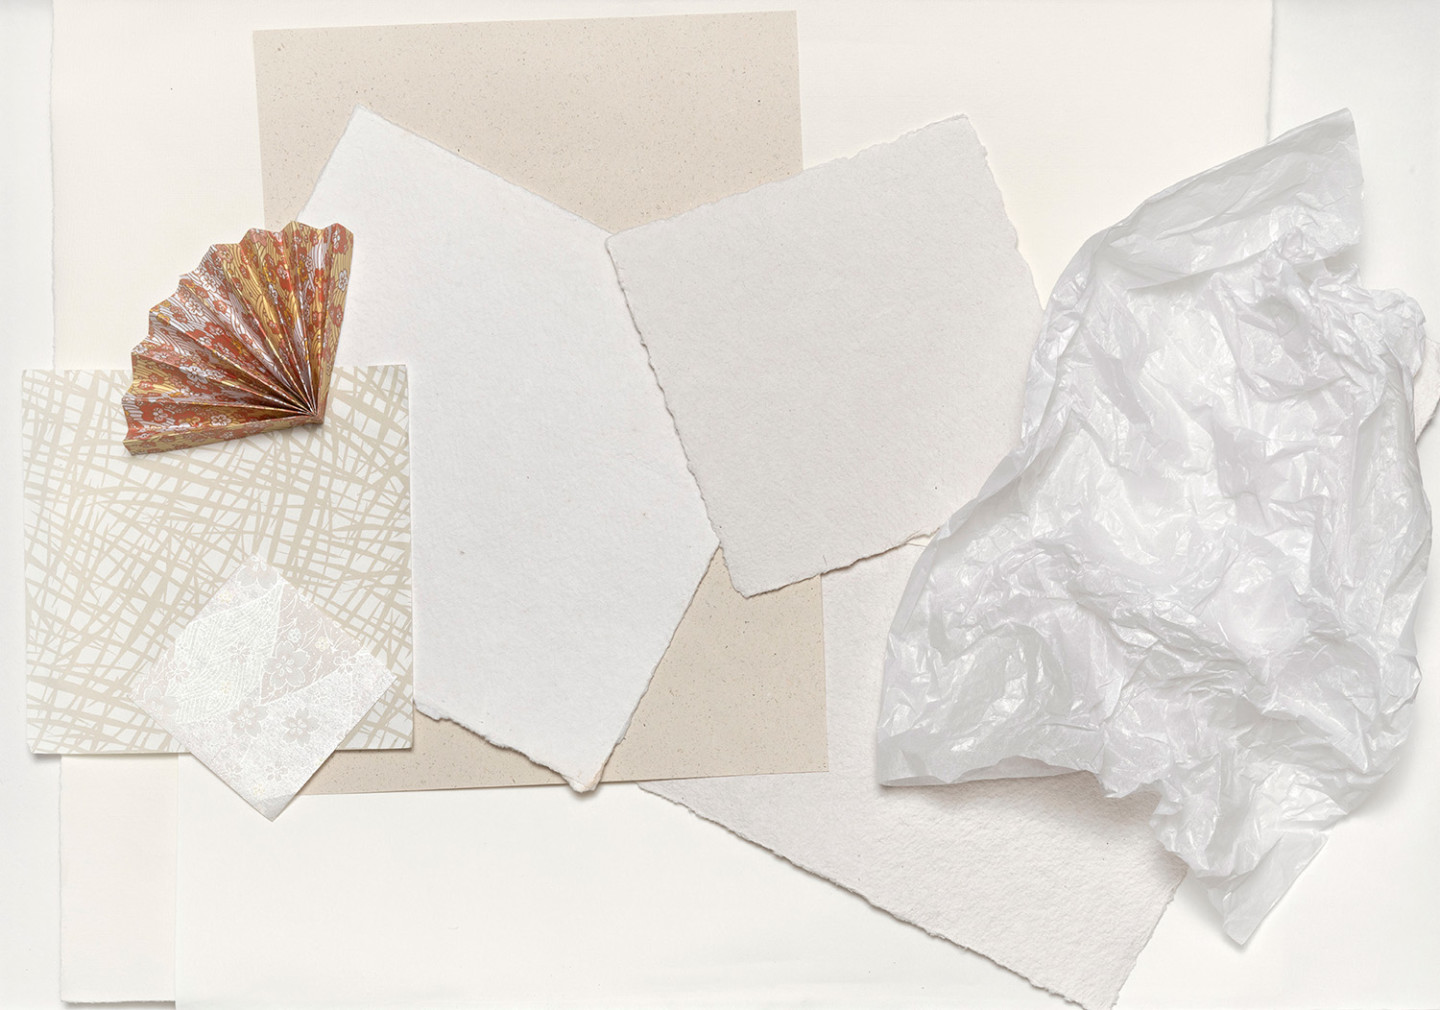  Papers of different qualities are spread out on a table.